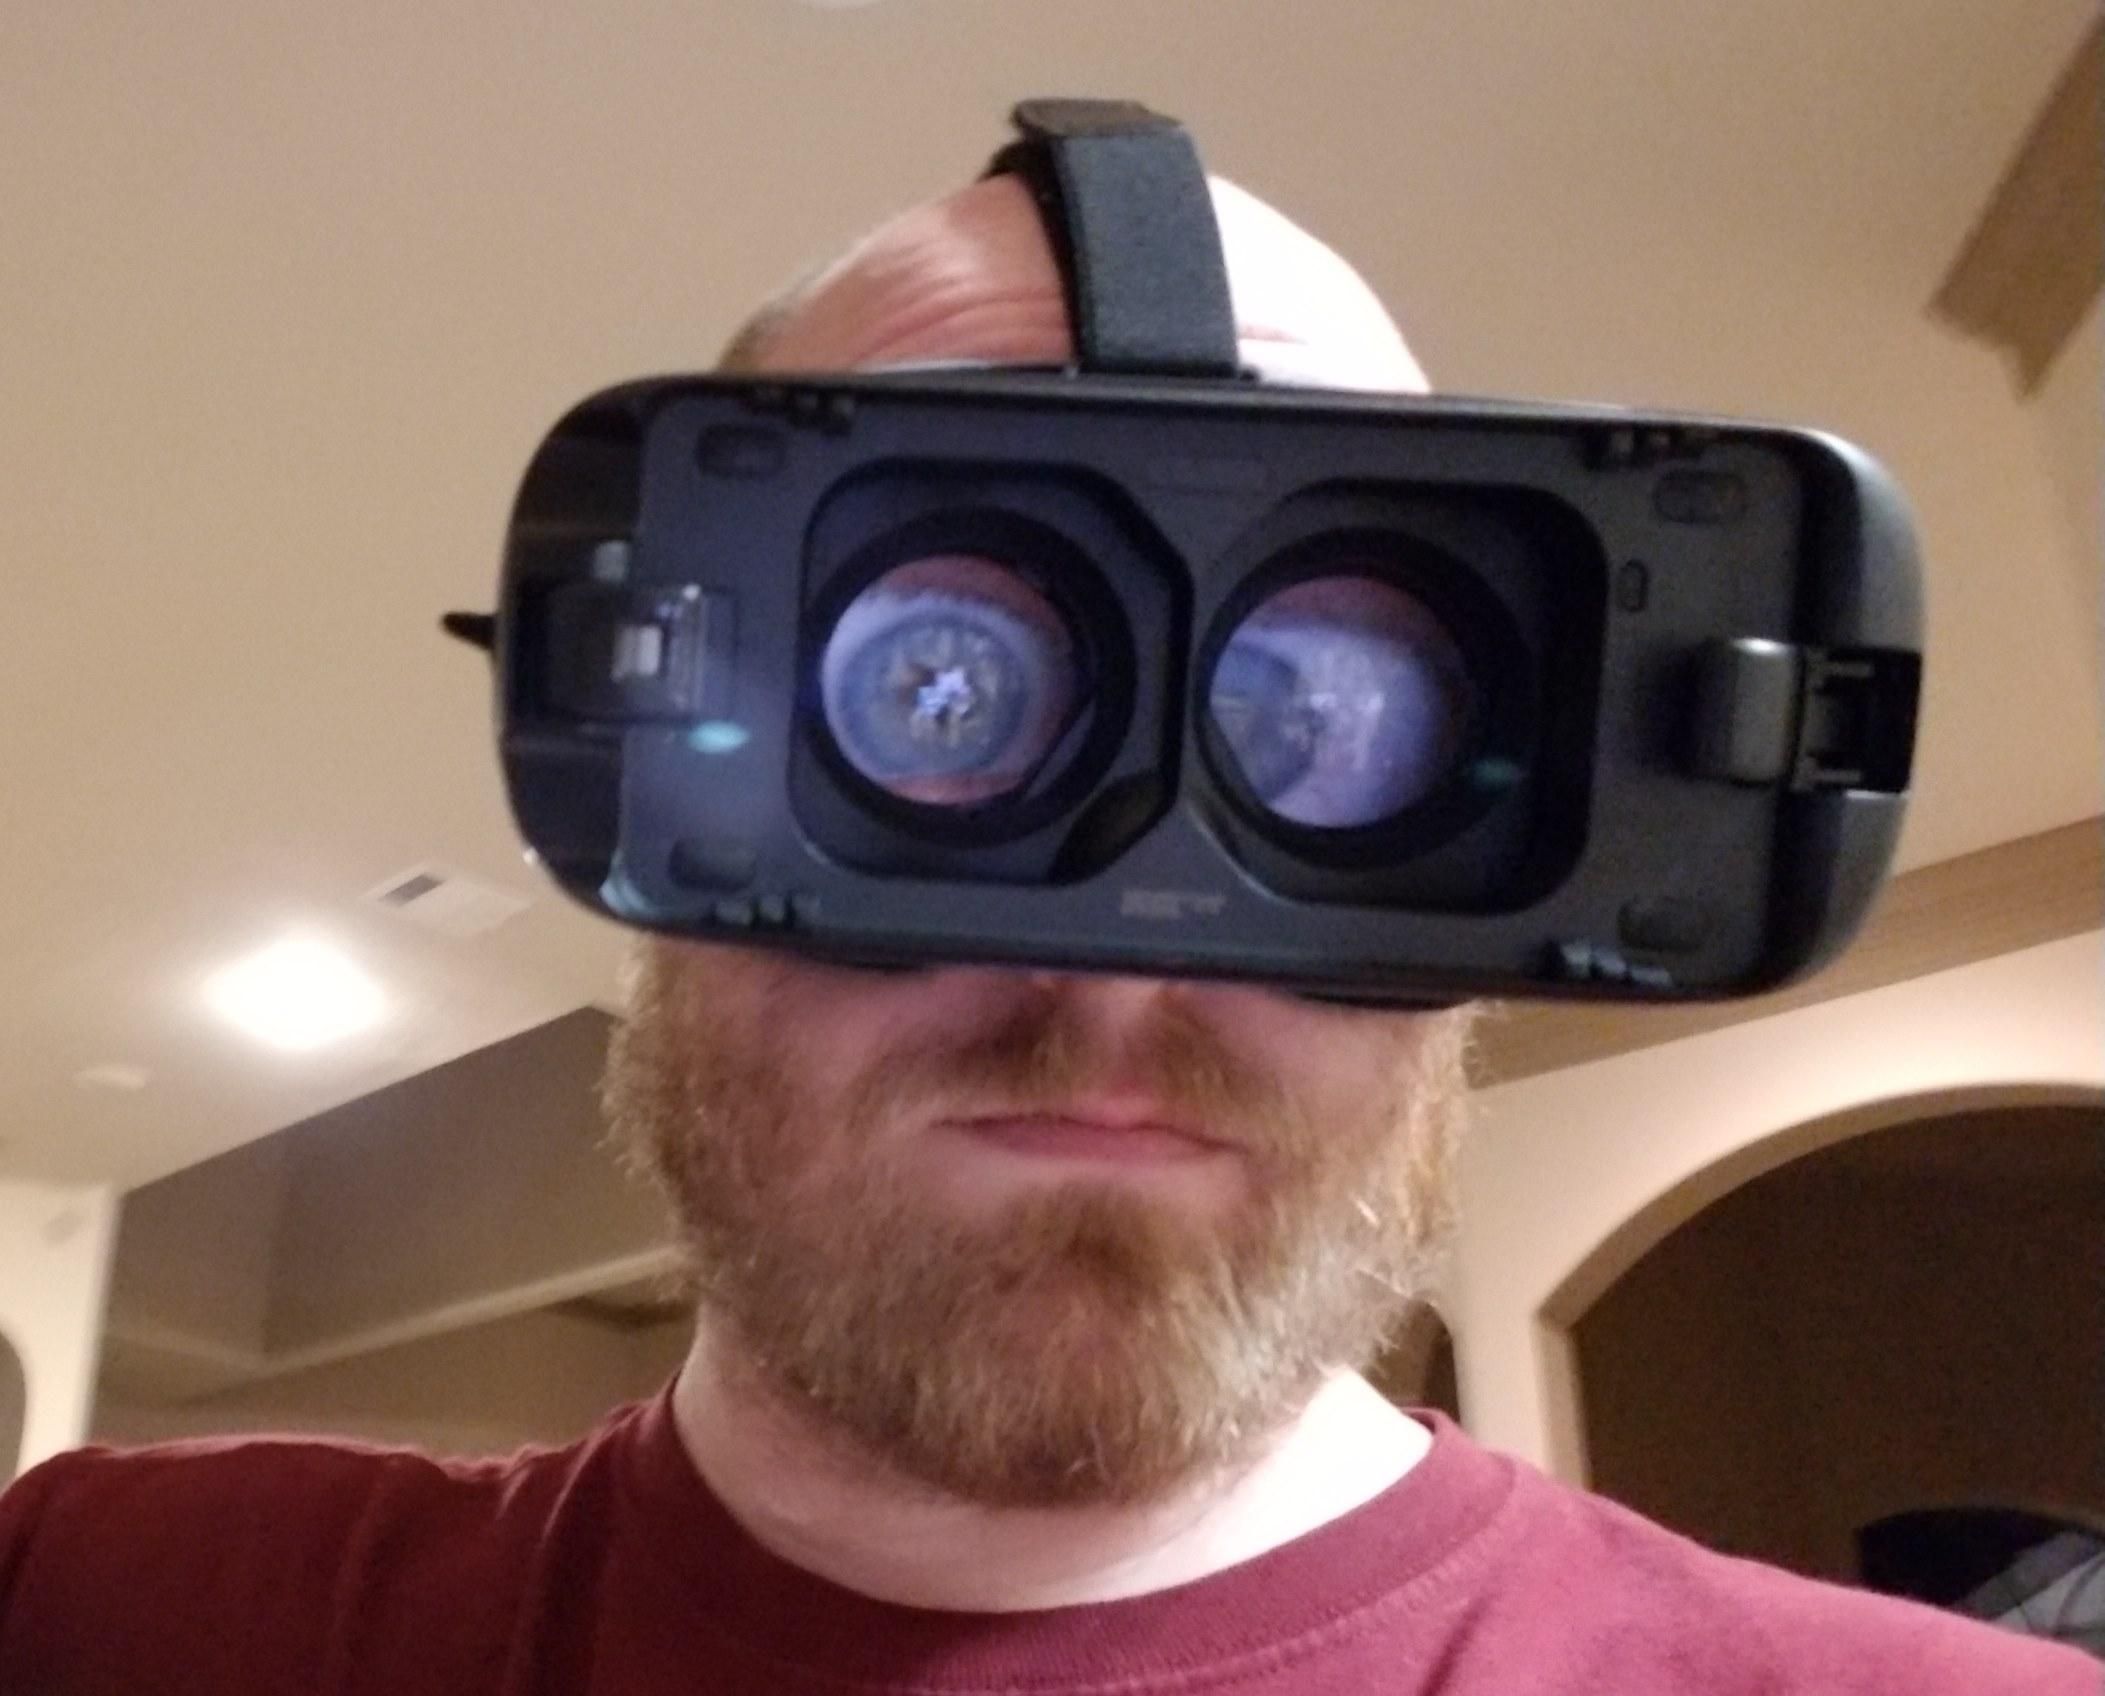 VR Goggles without the phone attached.